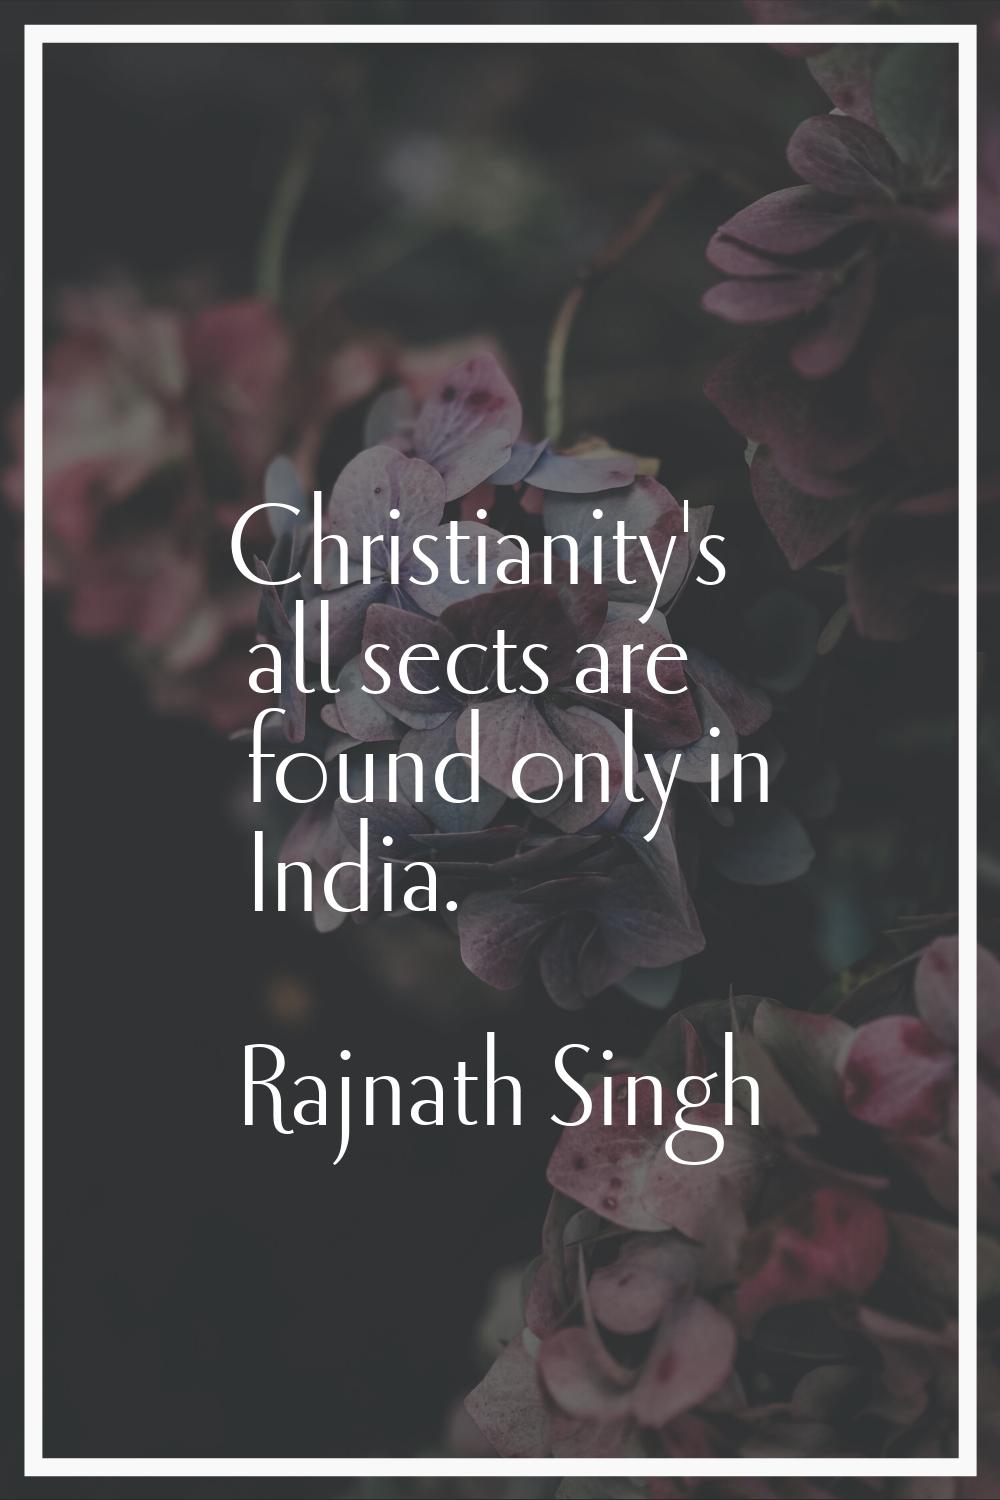 Christianity's all sects are found only in India.